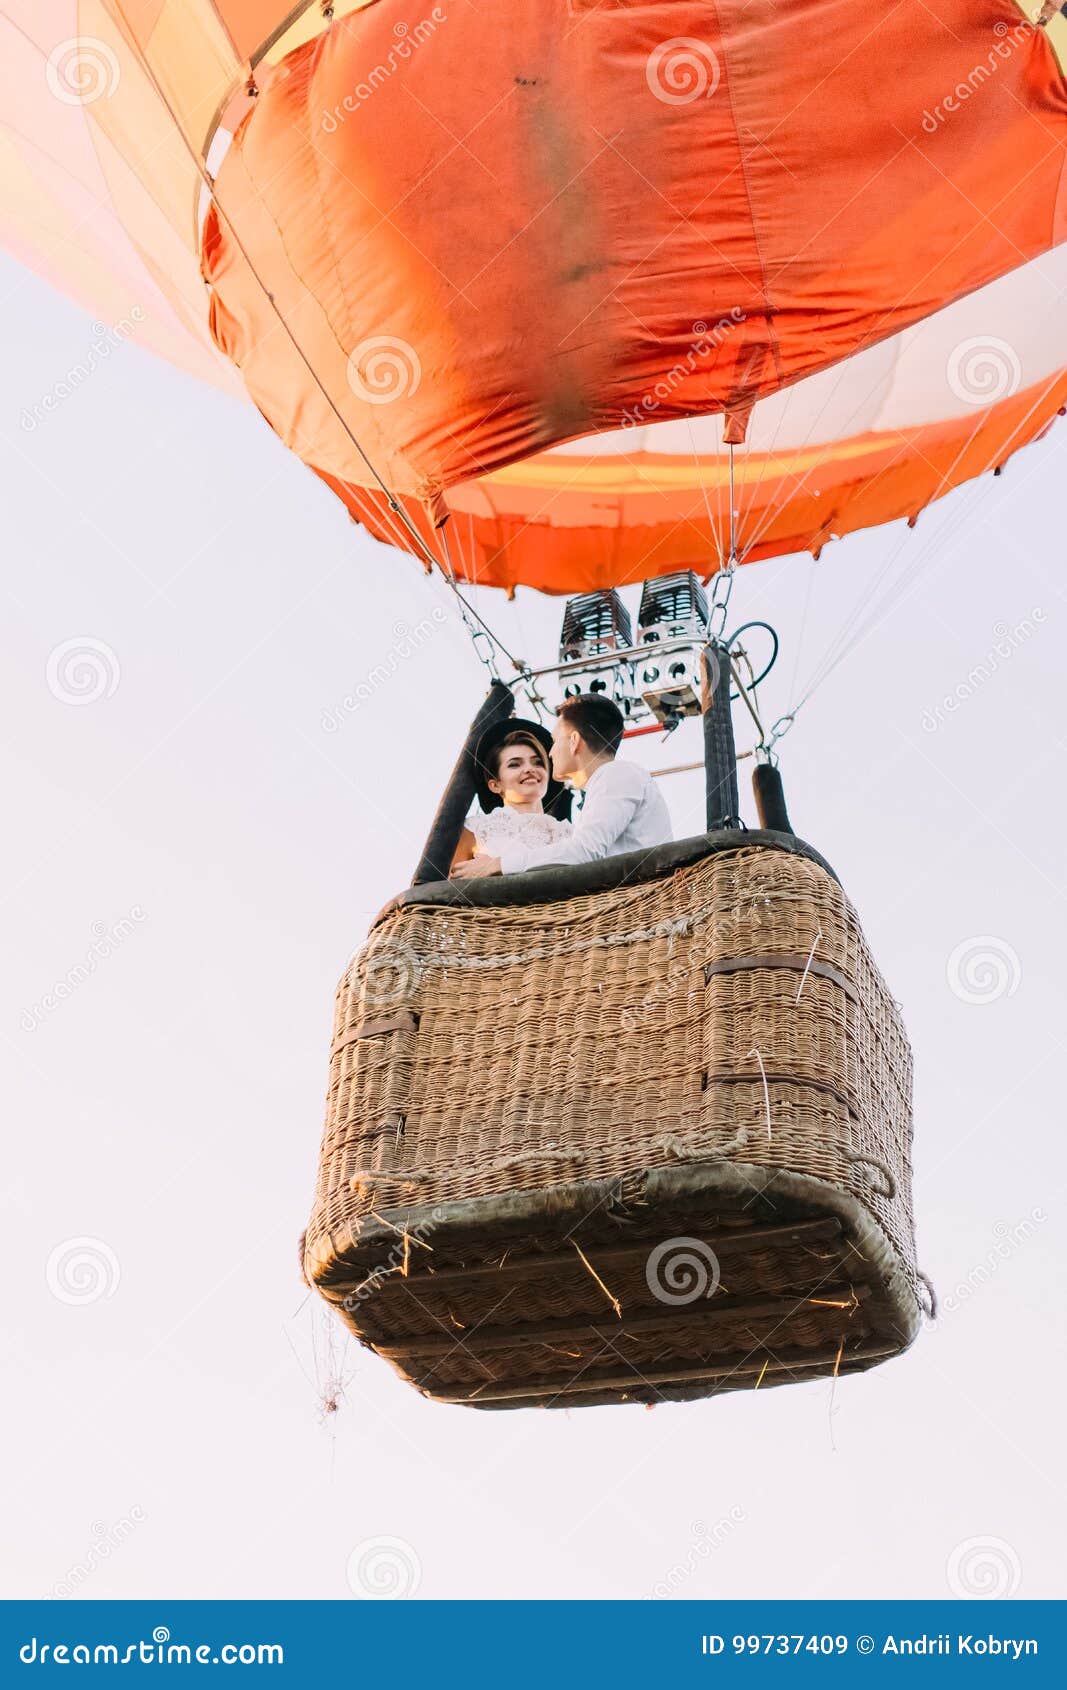 the upside view of the airballoon flying with the smiling vintage dressed newlyweds.